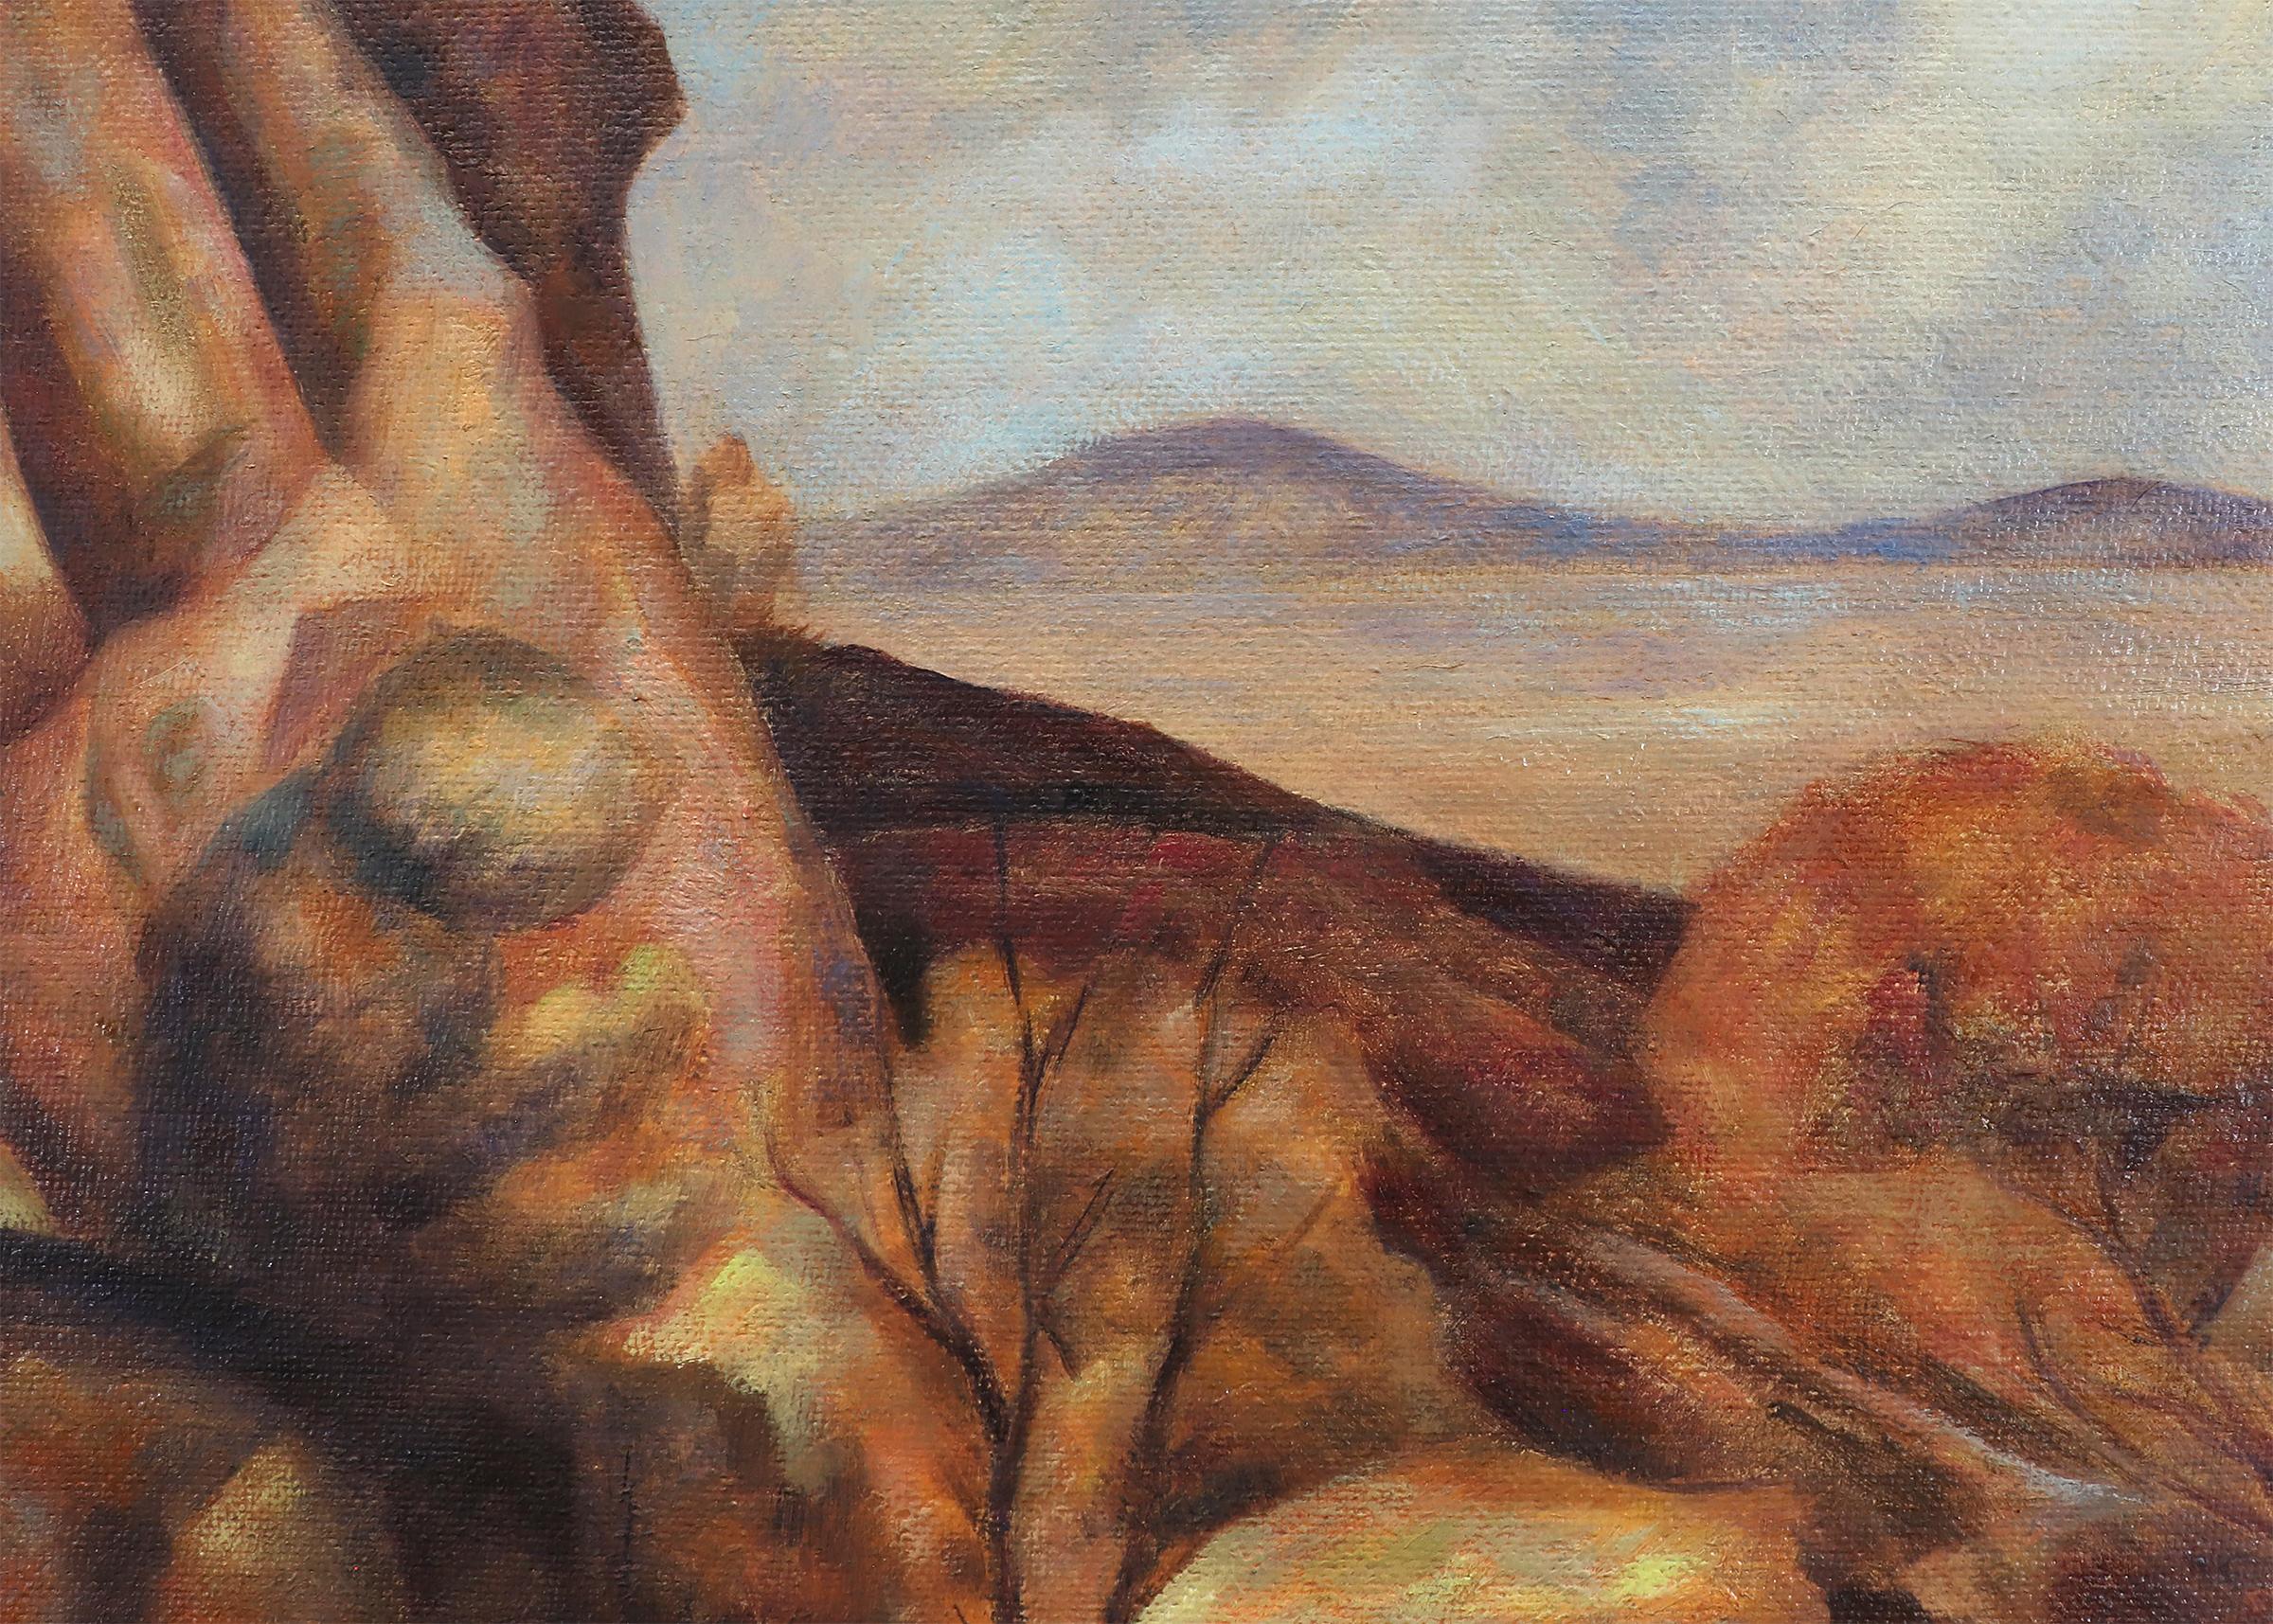 1930s Modernist Oil Painting of a Colorado Landscape, Rocks & Mesa, brown, blue - Brown Landscape Painting by John Edward Thompson